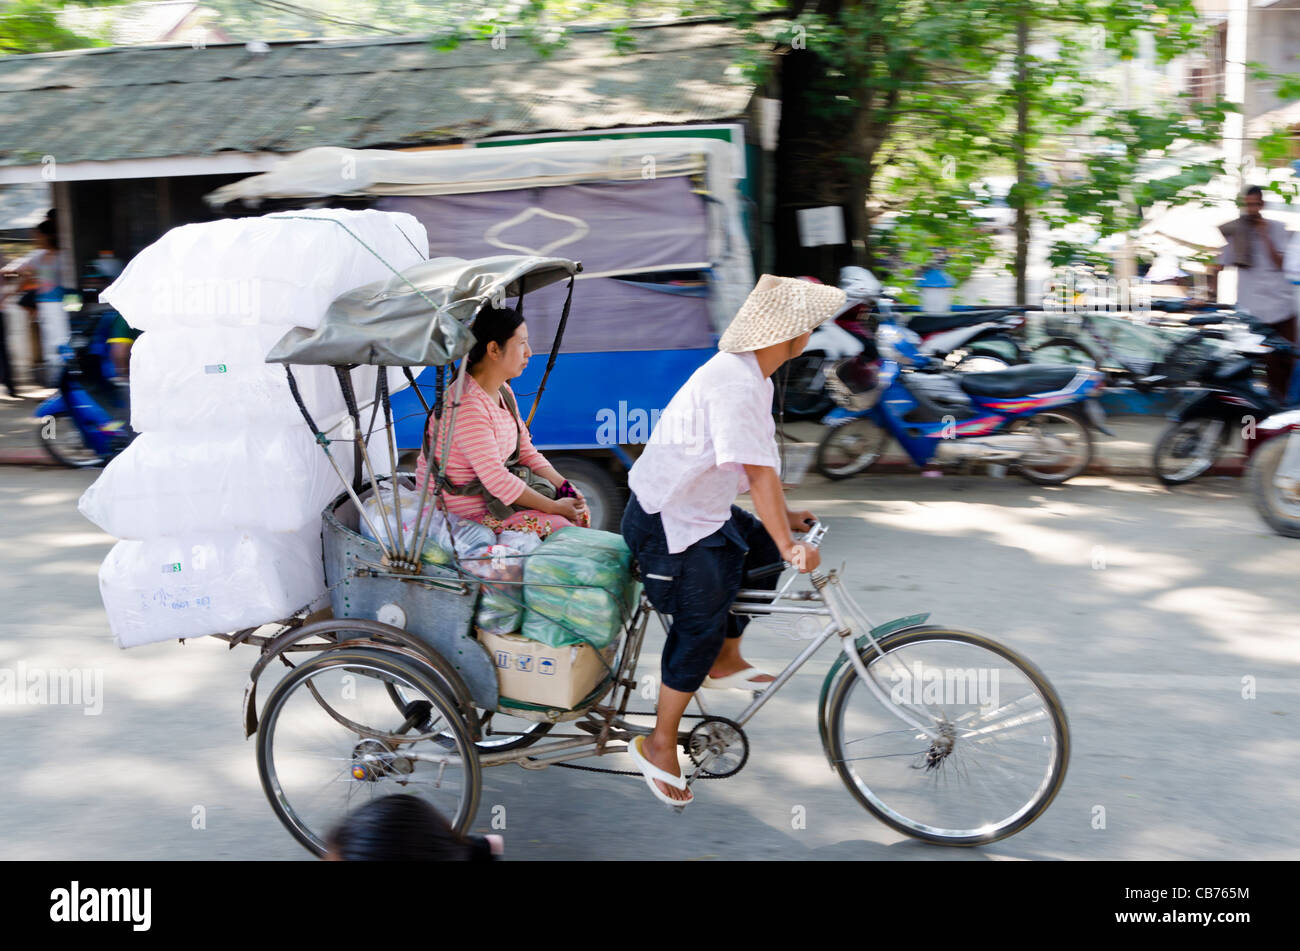 A man wearing a conical straw hat pedals a bicycle rickshaw with ...